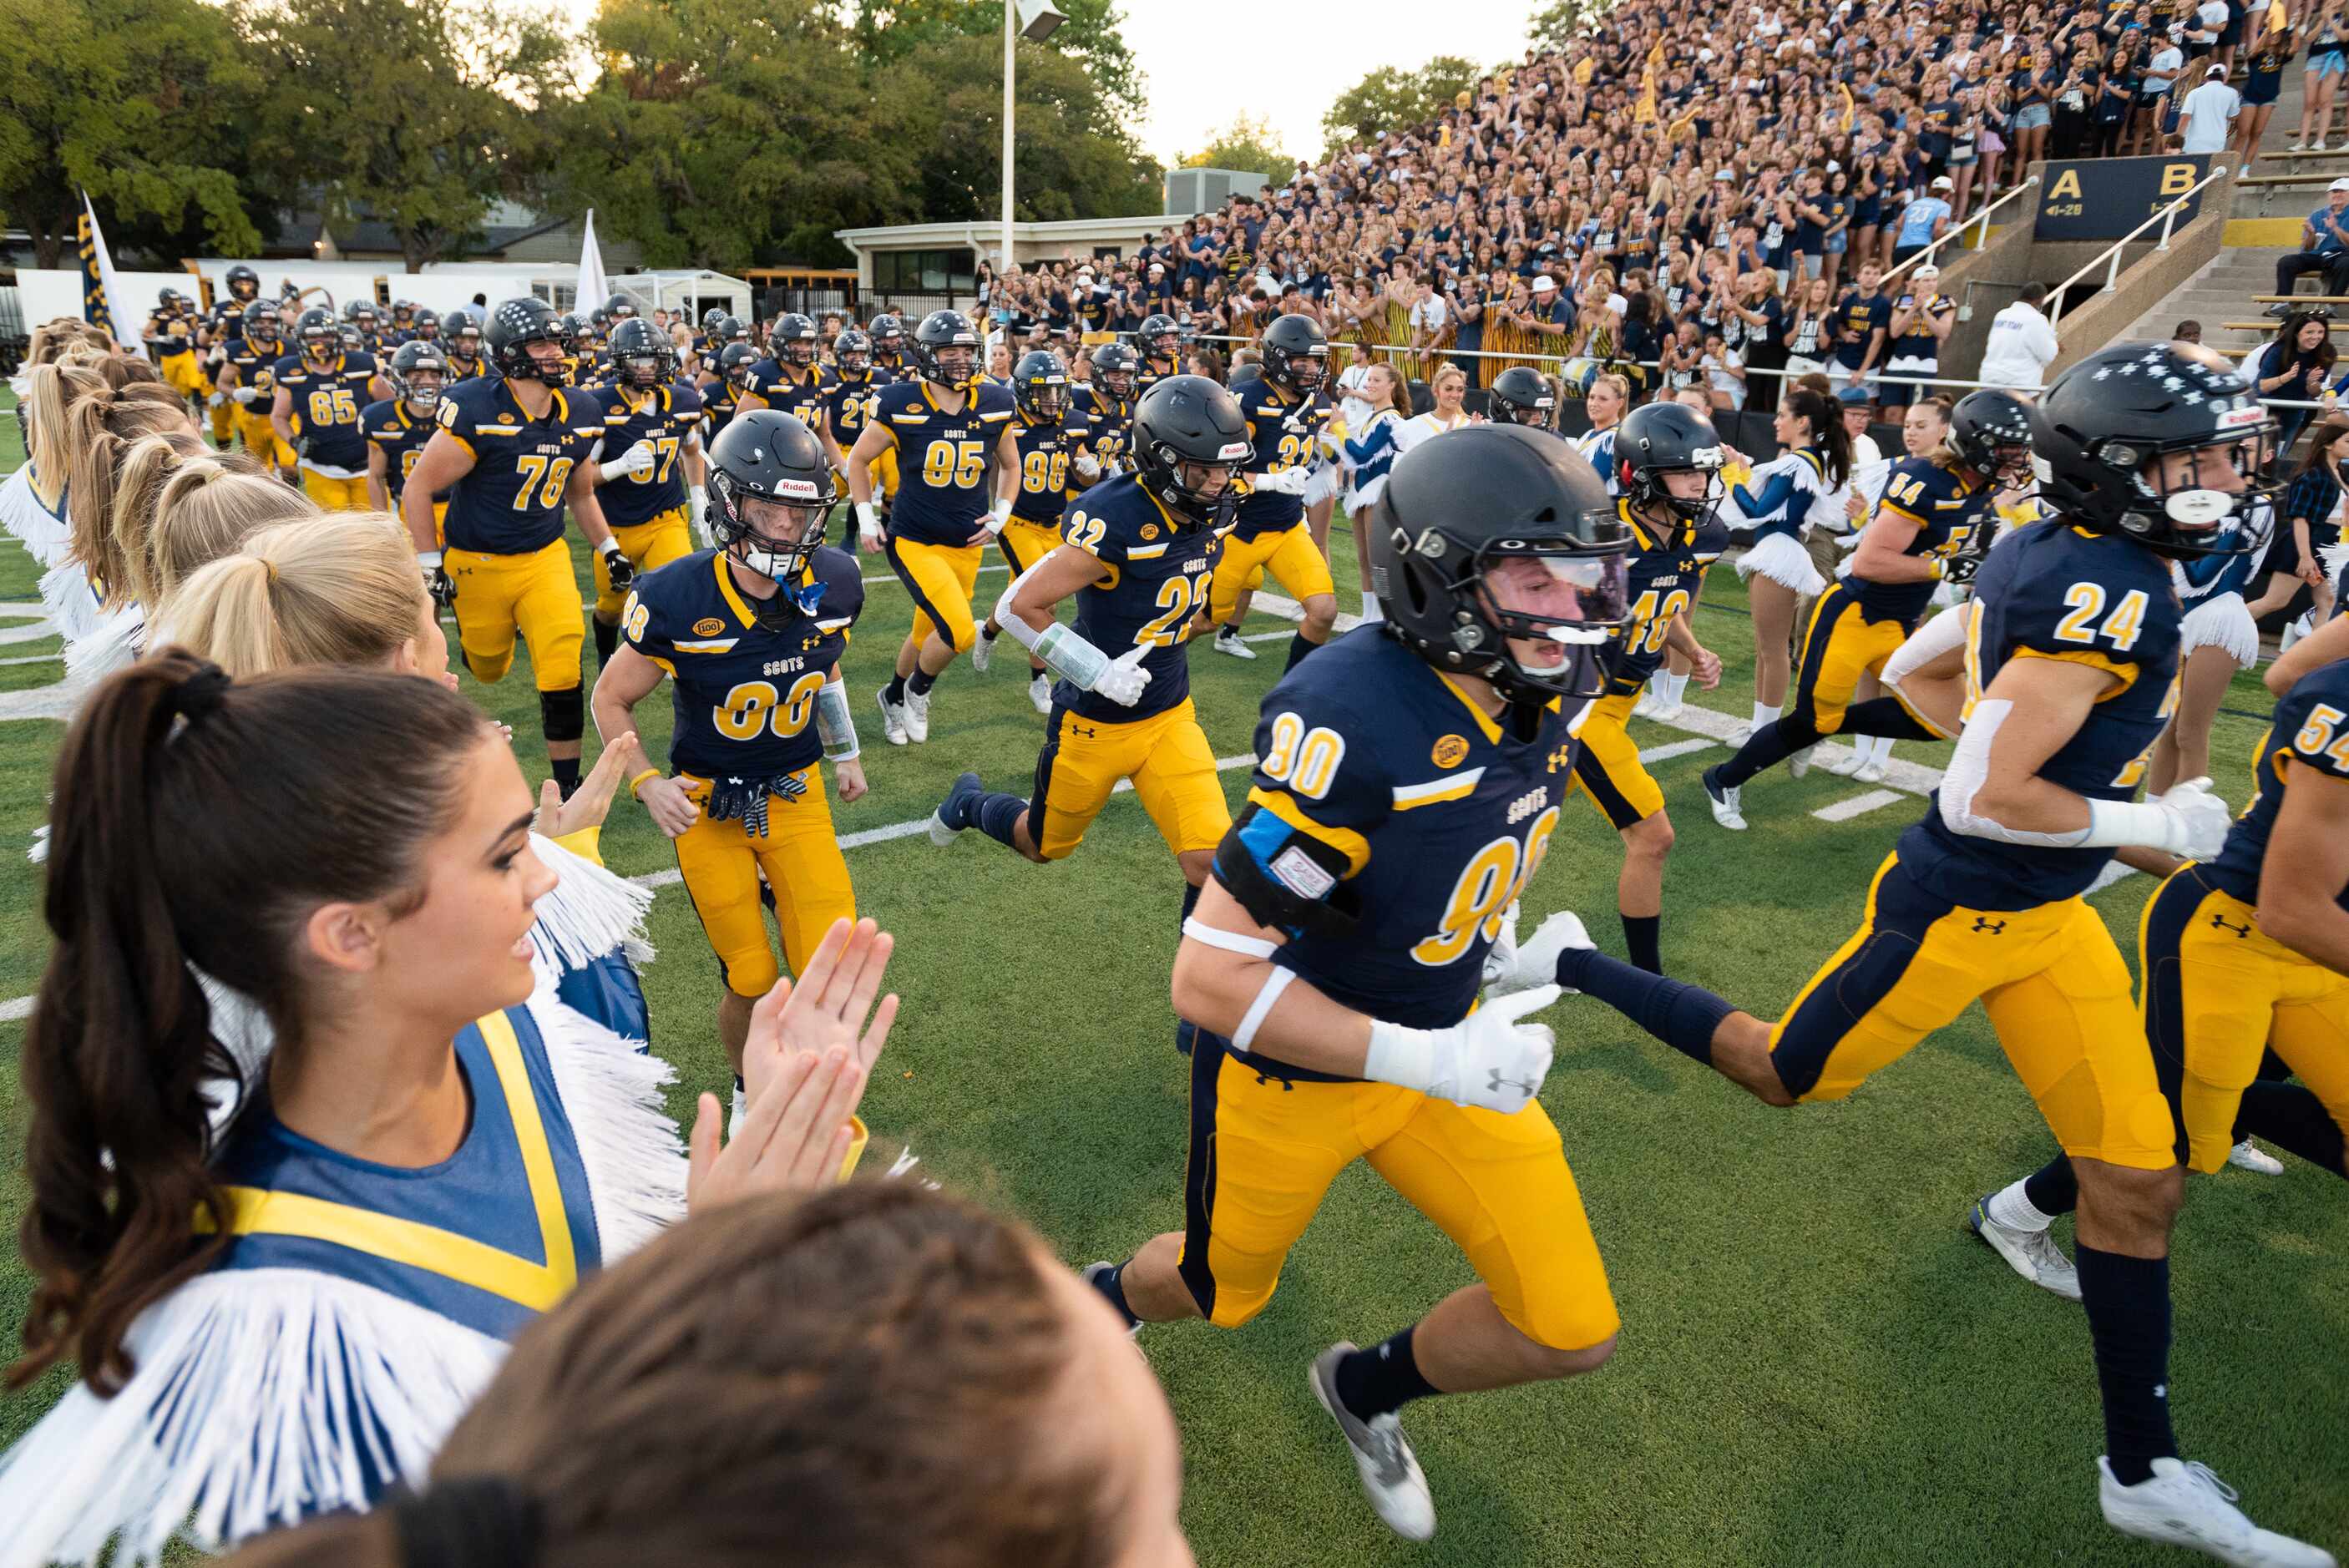 Highland Park football players run on to the field for their Friday night high school game...